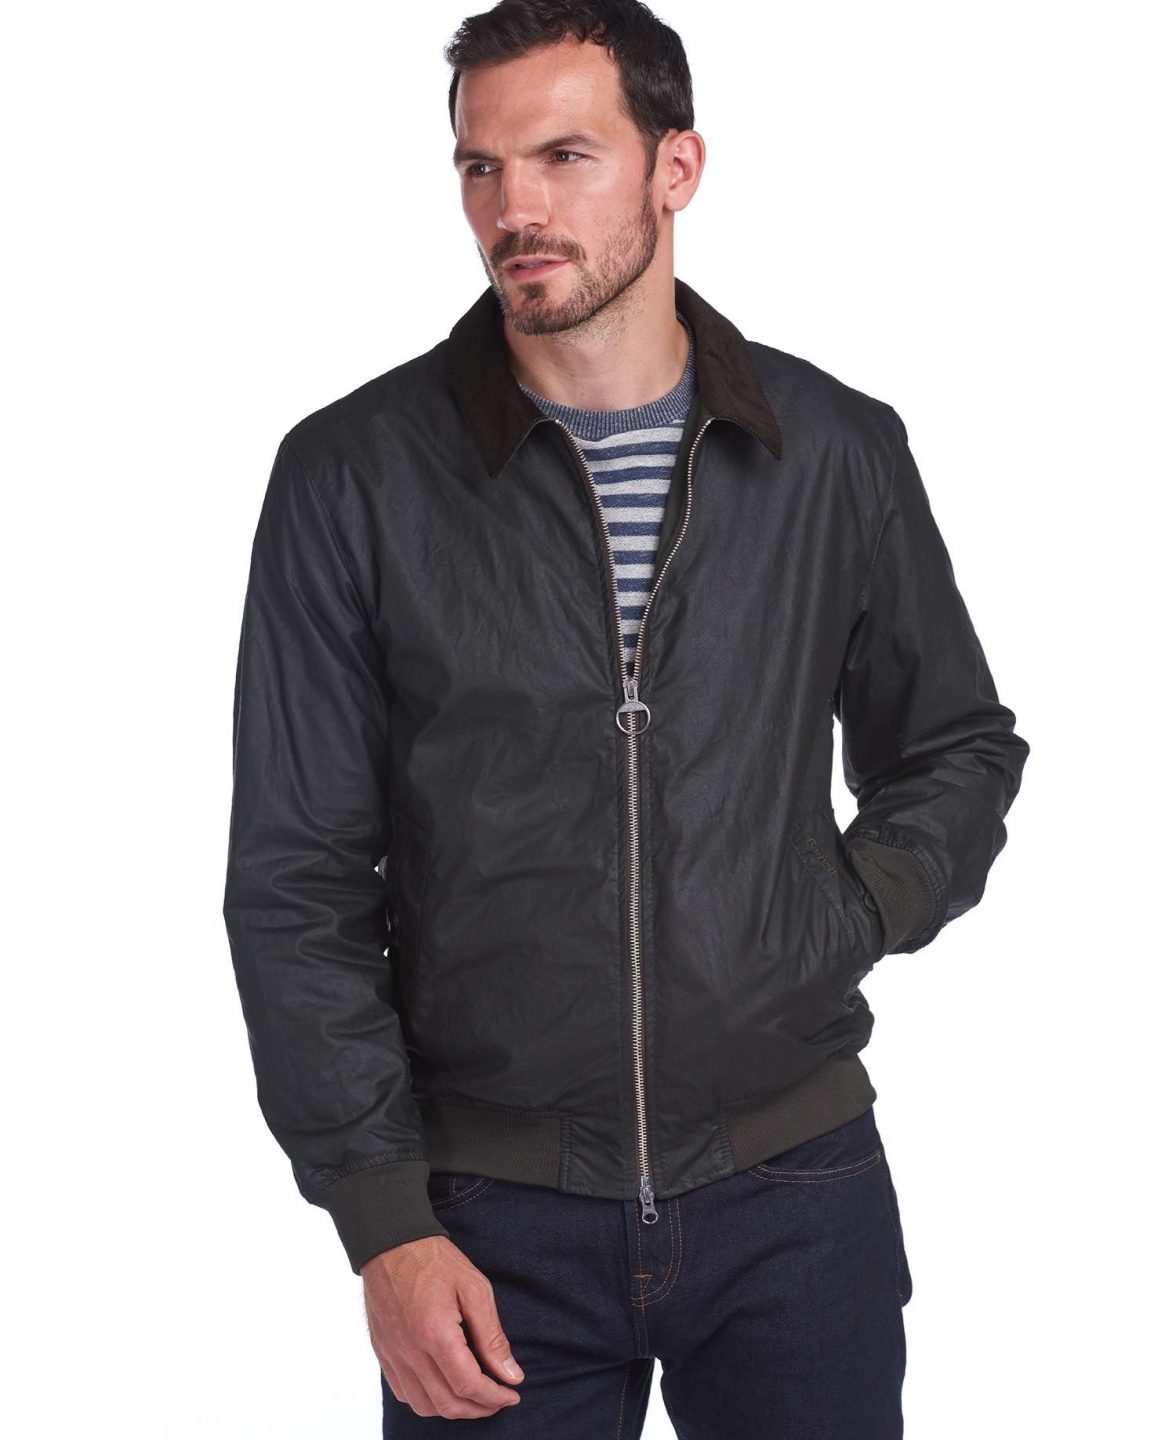 Barbour Advection Wax Jacket | Walters of Oxford - Barbour